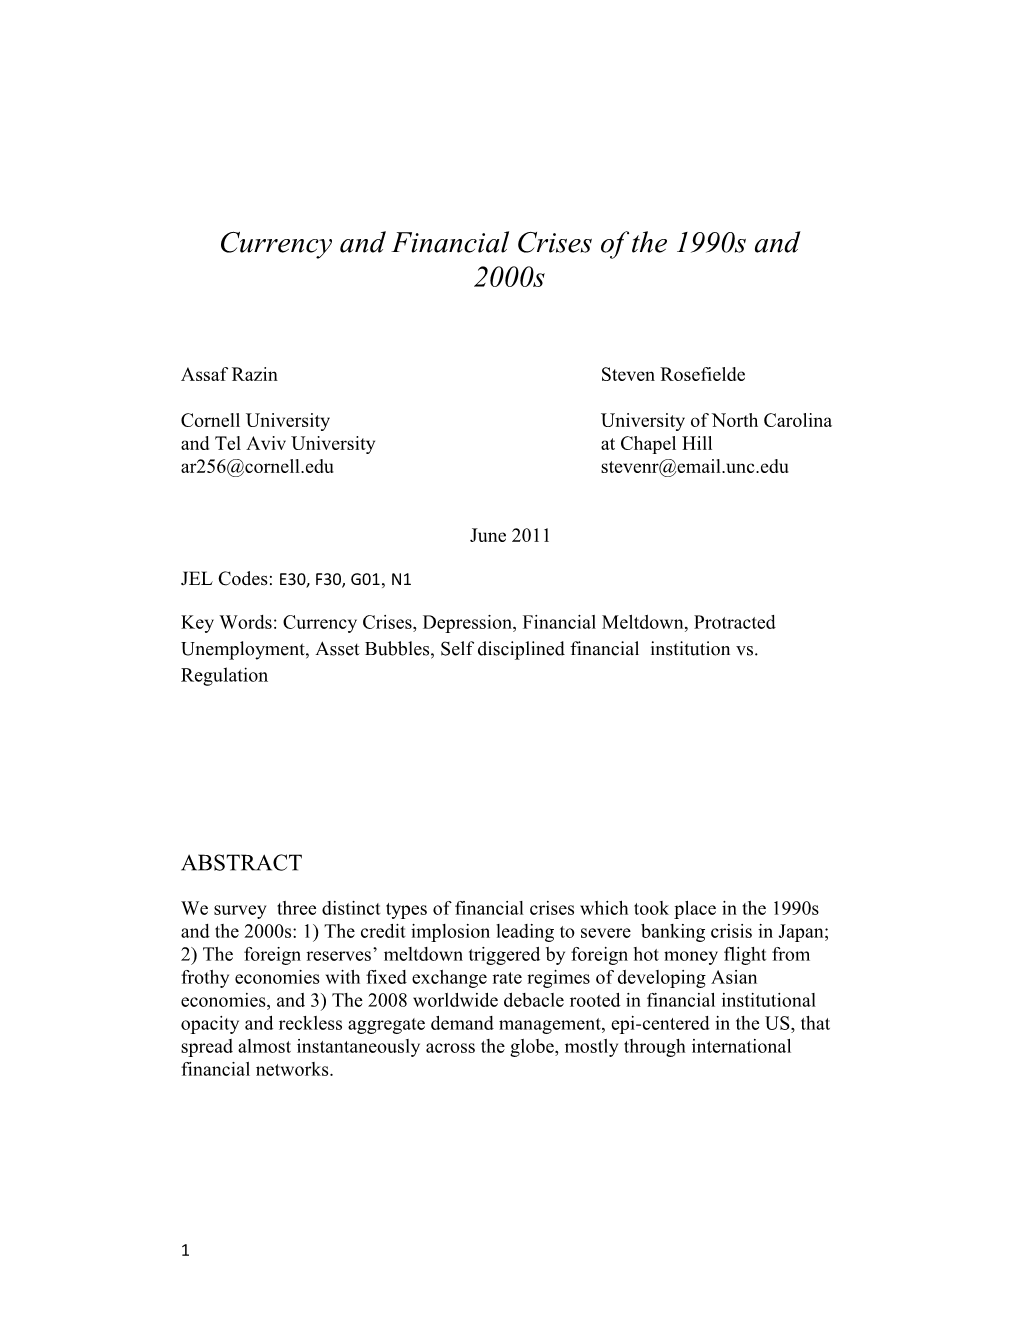 Currency And Financial Crises Of The 1990S And 2000S?